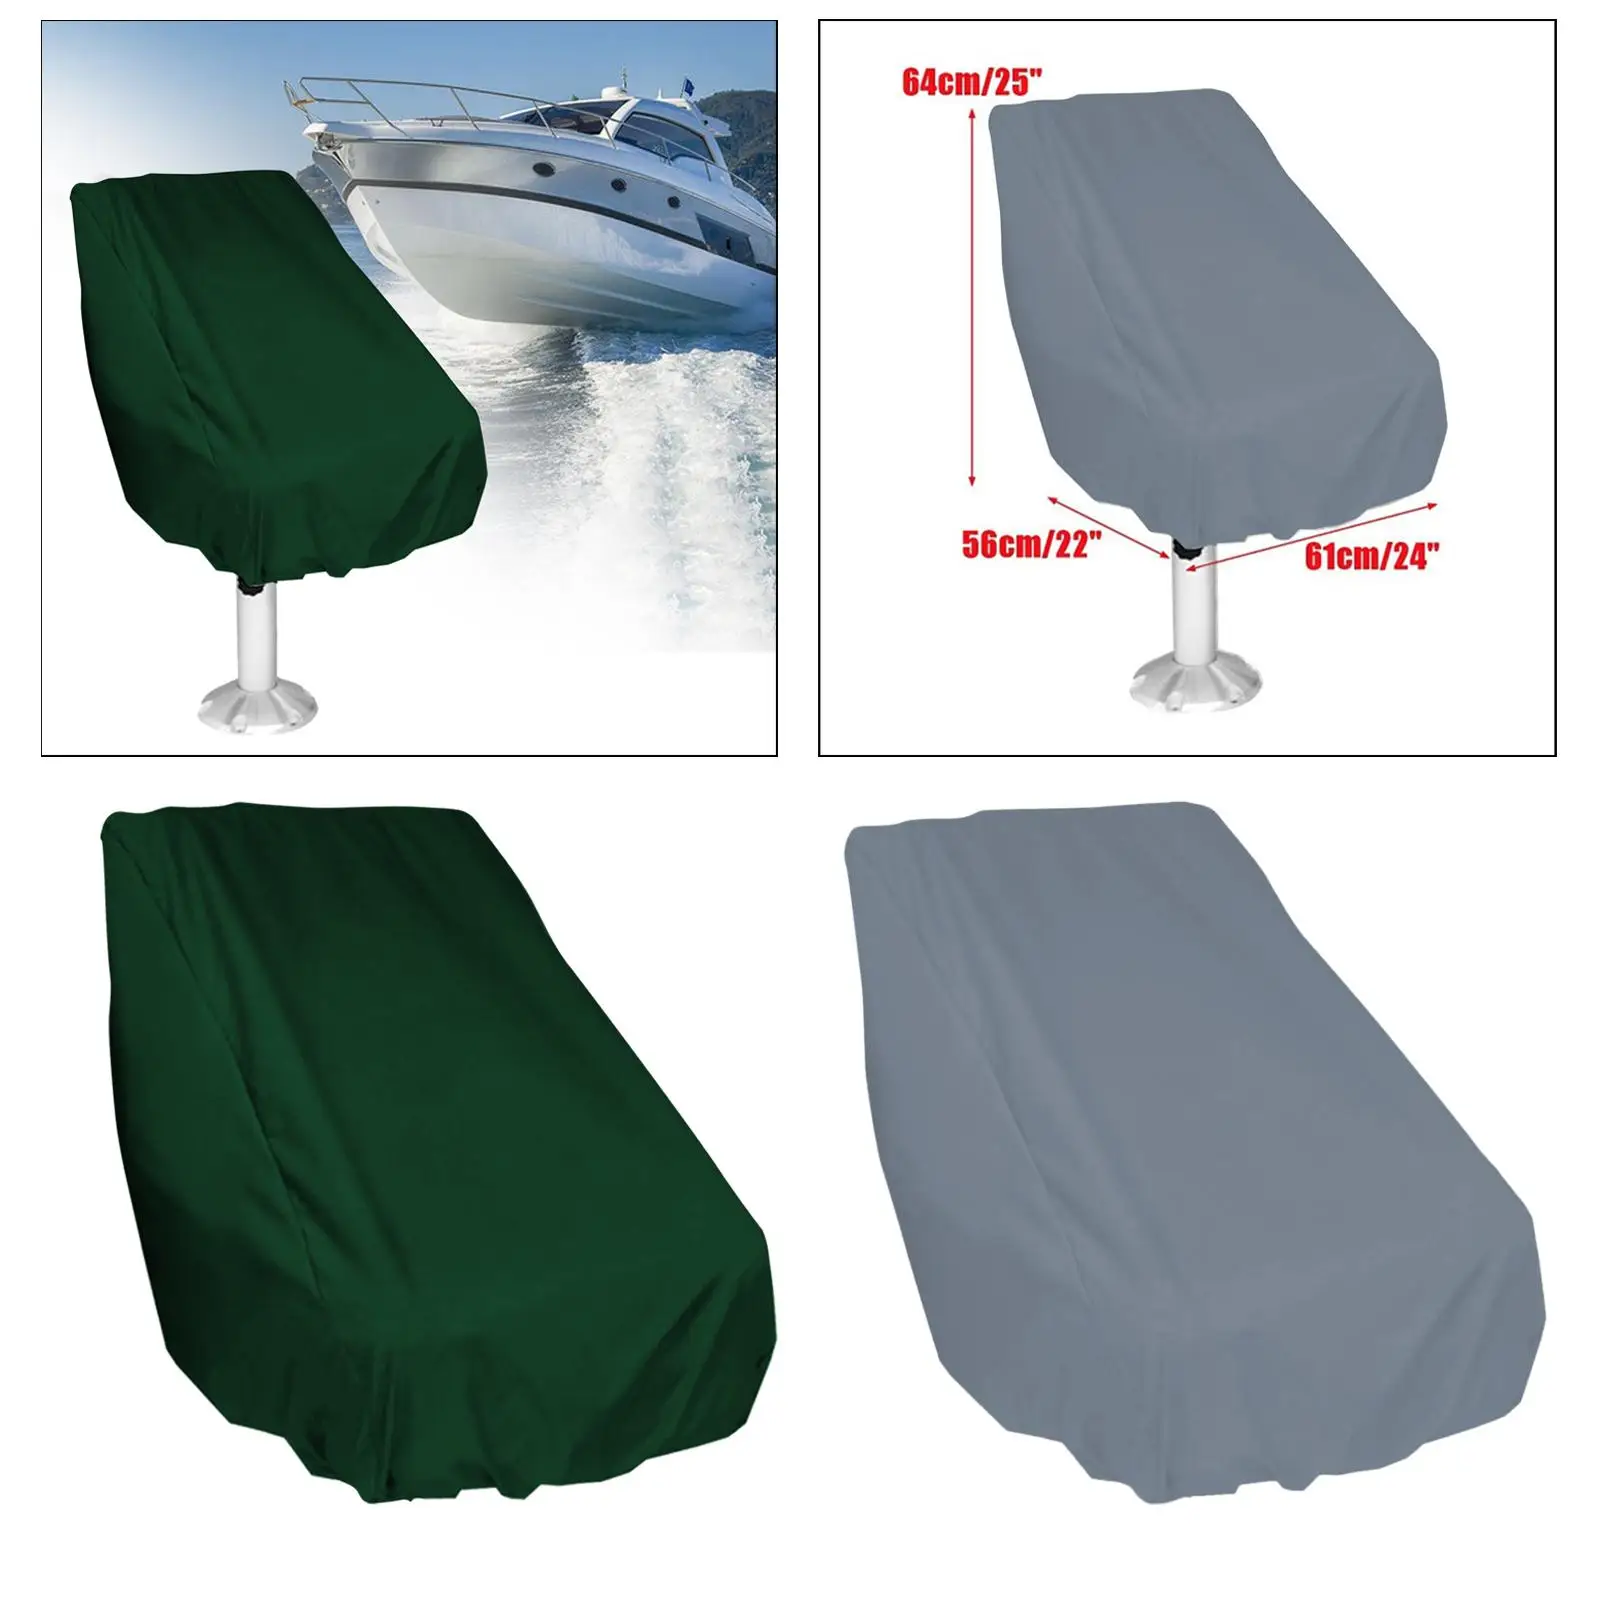 Boat Seat Cover, Outdoor Waterproof Pedestal Pontoon Captain Boat Bench Chair